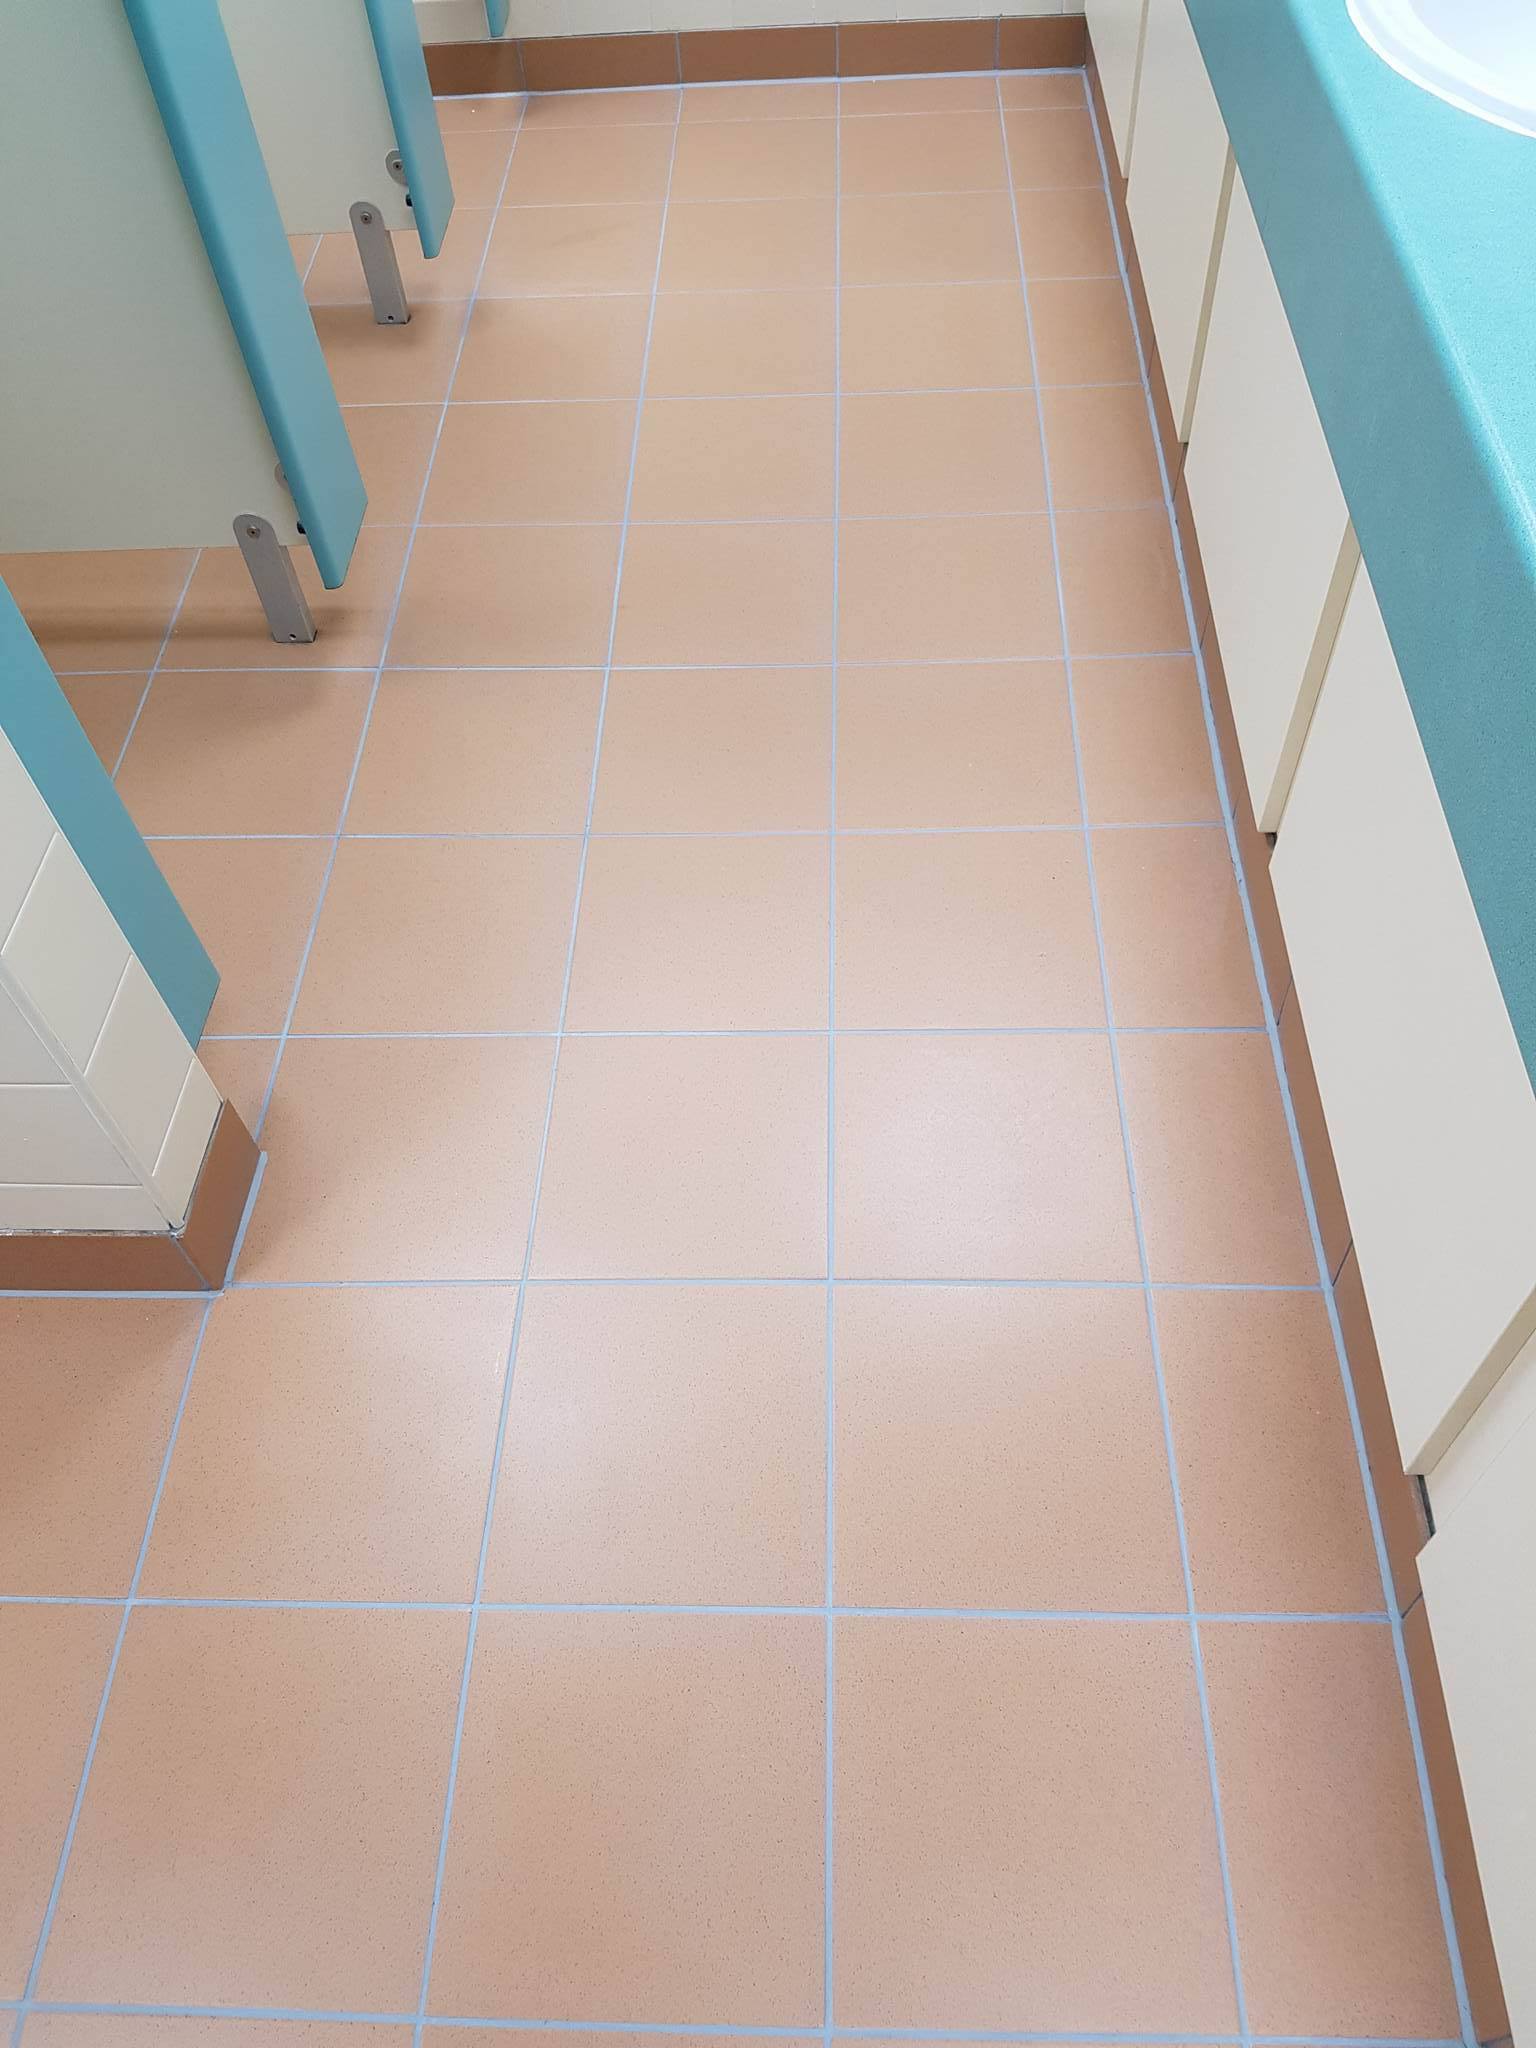 Manchester commercial tile and grout cleaning